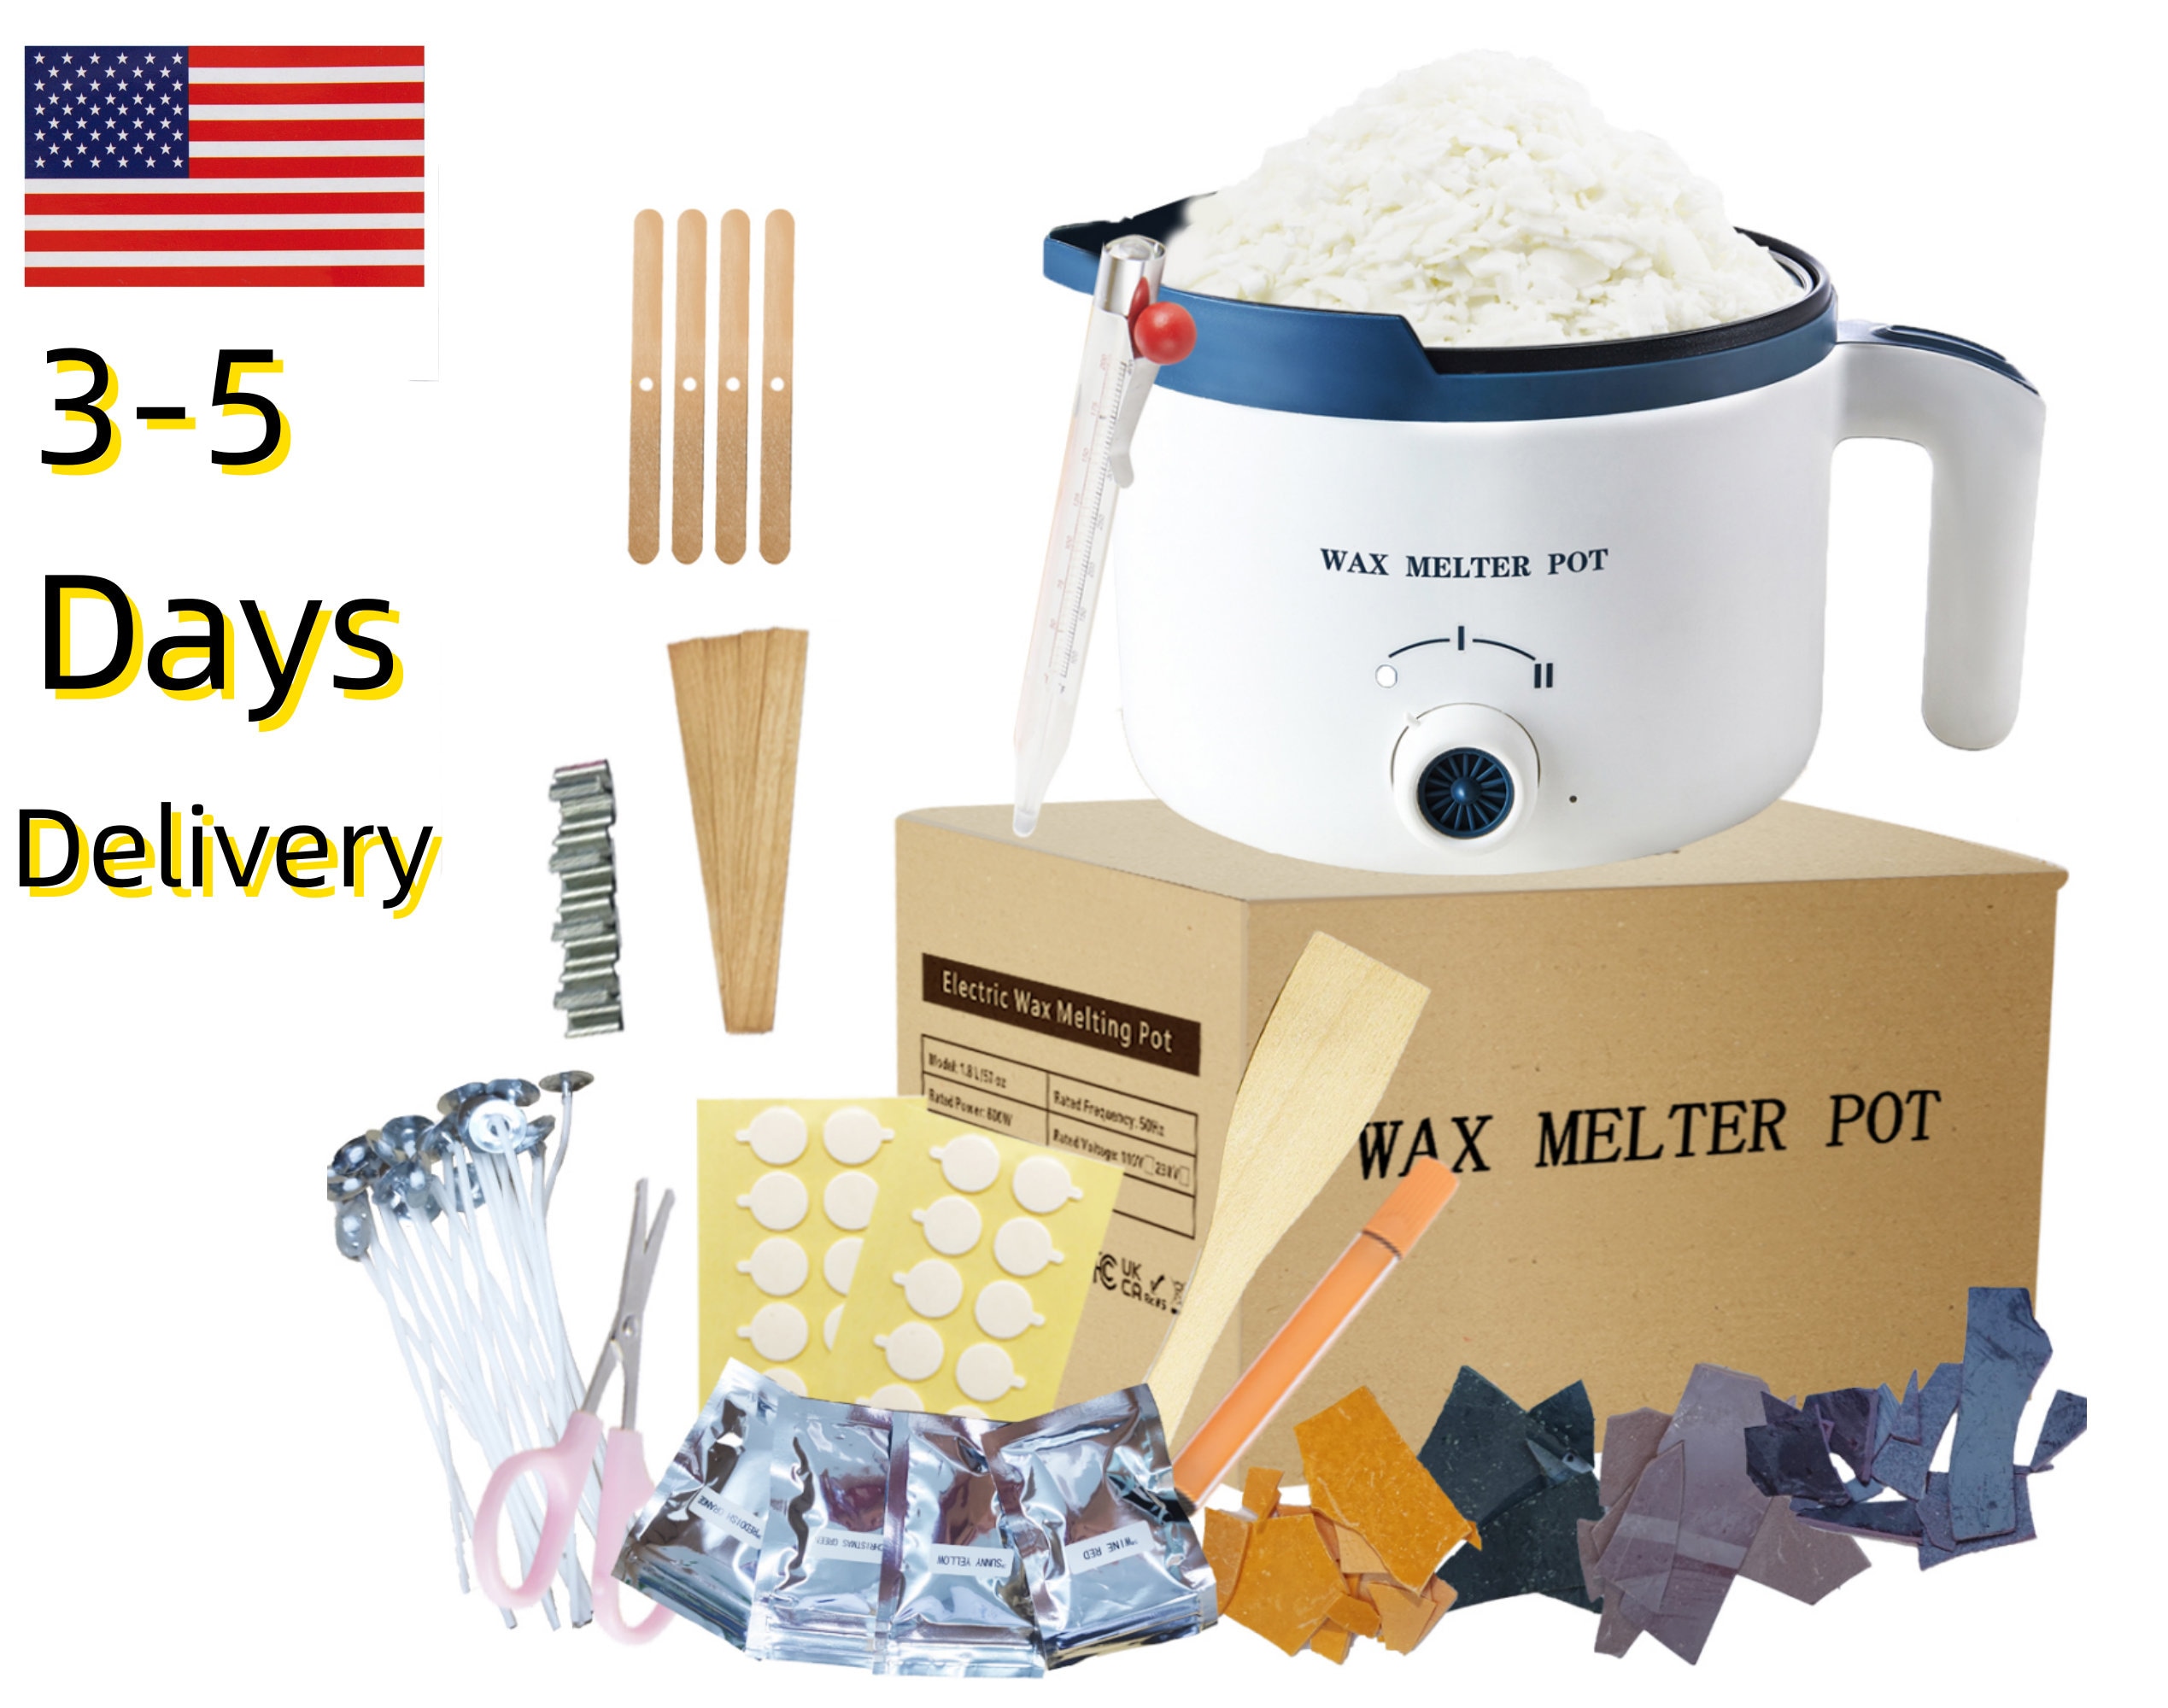 Wax Melter for Candle Making with Thermal Jacket, 20Qts/29.26Lbs Candle  Melting Pot, Candle Wax Melting Pot Able to Melt All Kinds of Wax